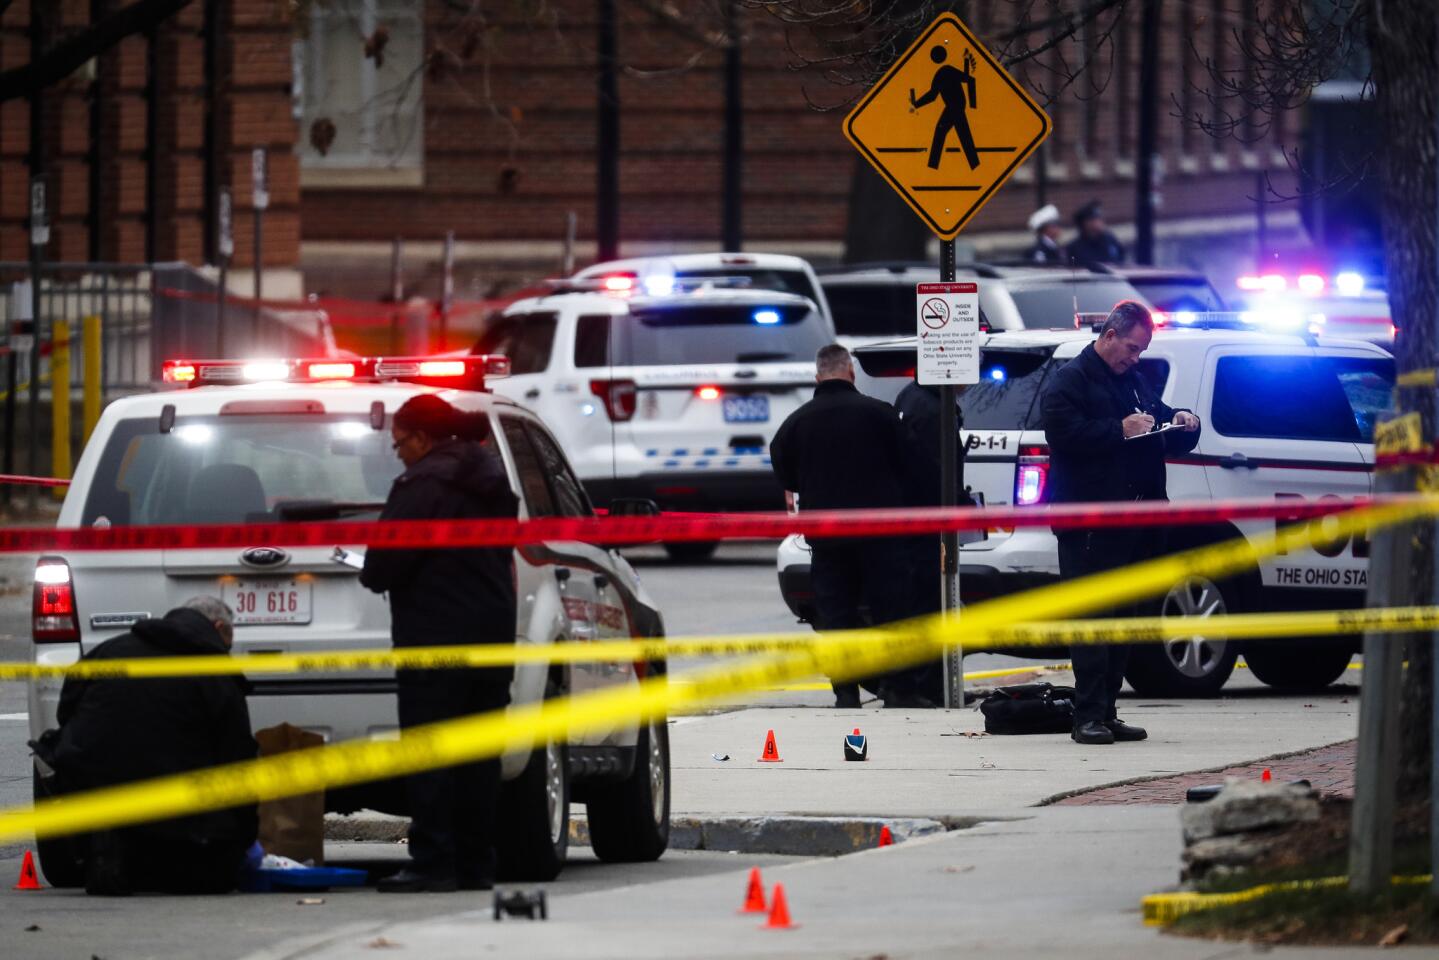 Crime scene investigators collect evidence from the pavement as police respond to an attack on campus at Ohio State University on Nov. 28, 2016, in Columbus, Ohio.